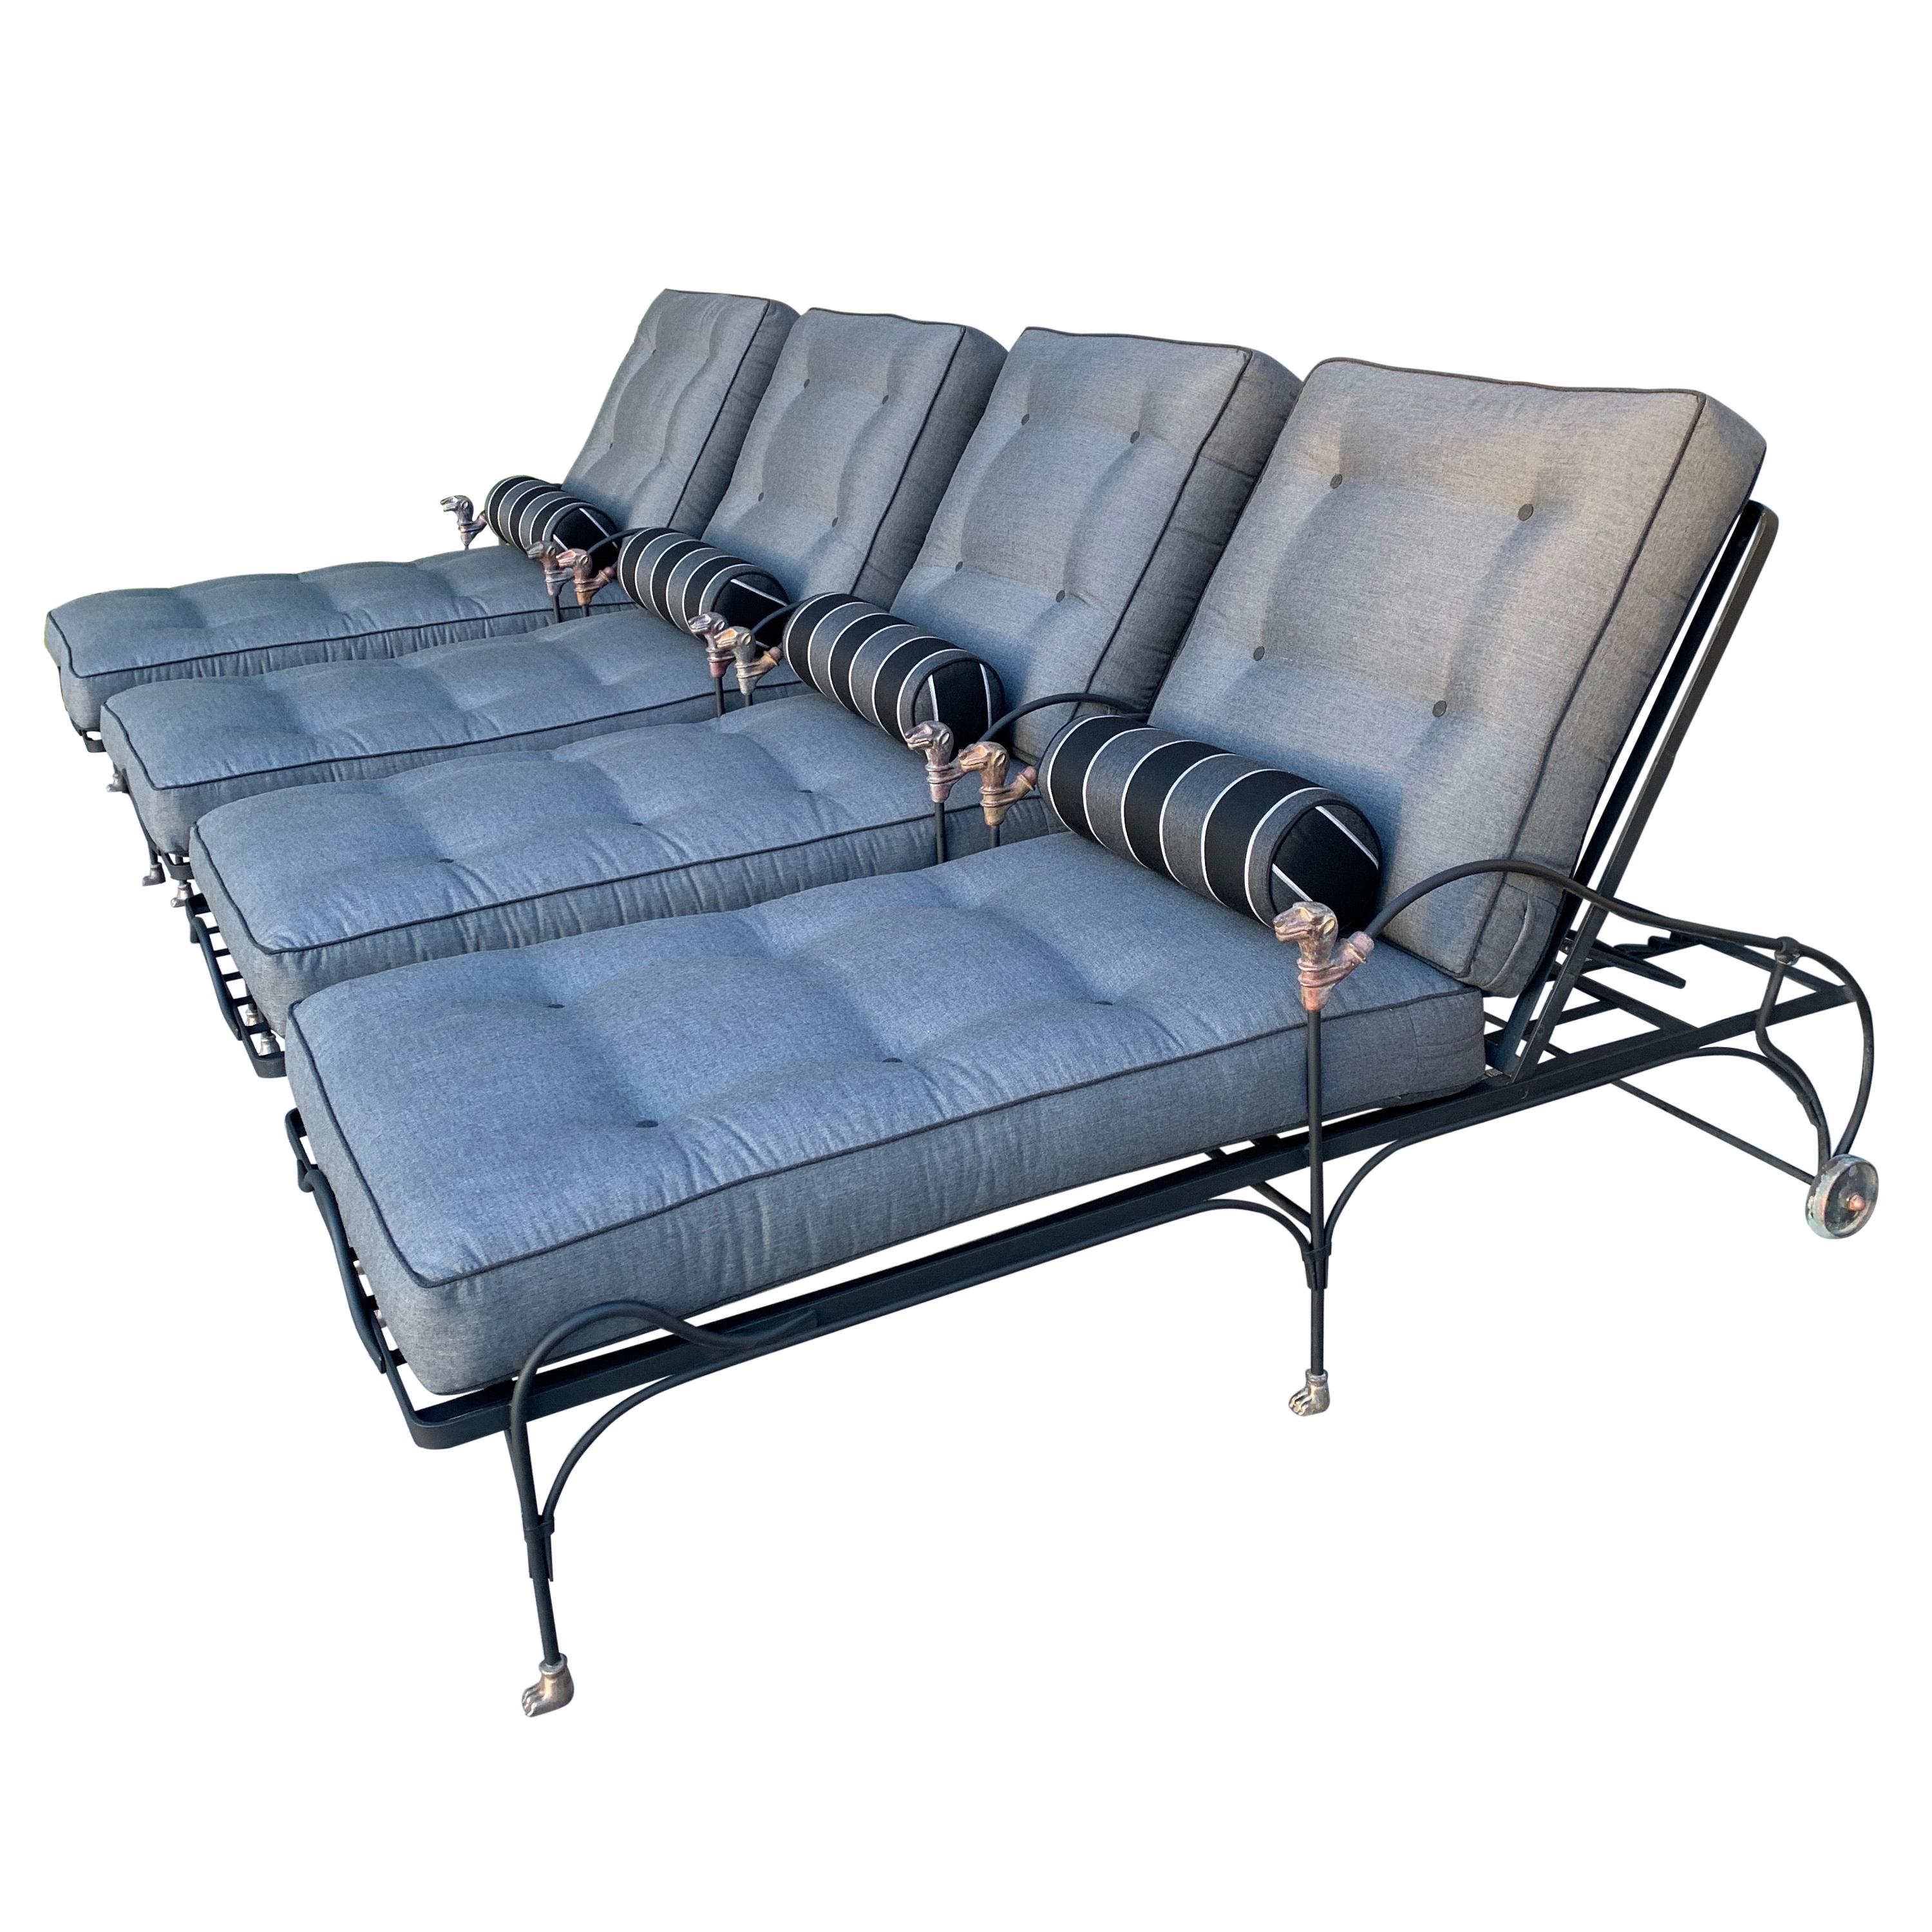 Four Wrought Iron Chaises with Bronze Details in the Style of Giacometti